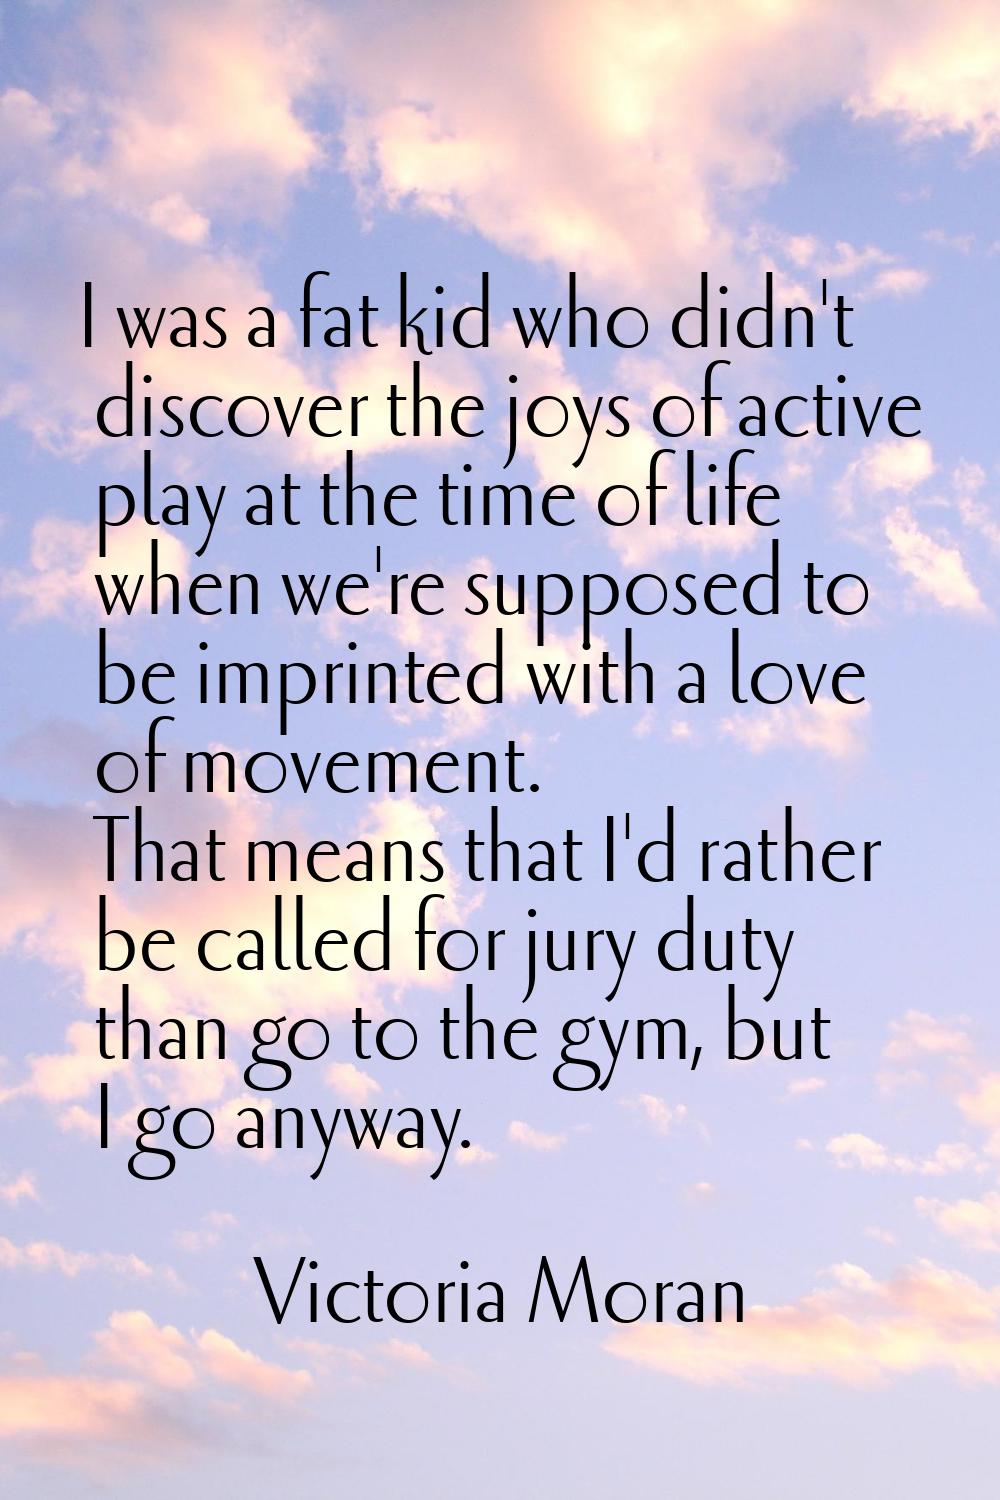 I was a fat kid who didn't discover the joys of active play at the time of life when we're supposed